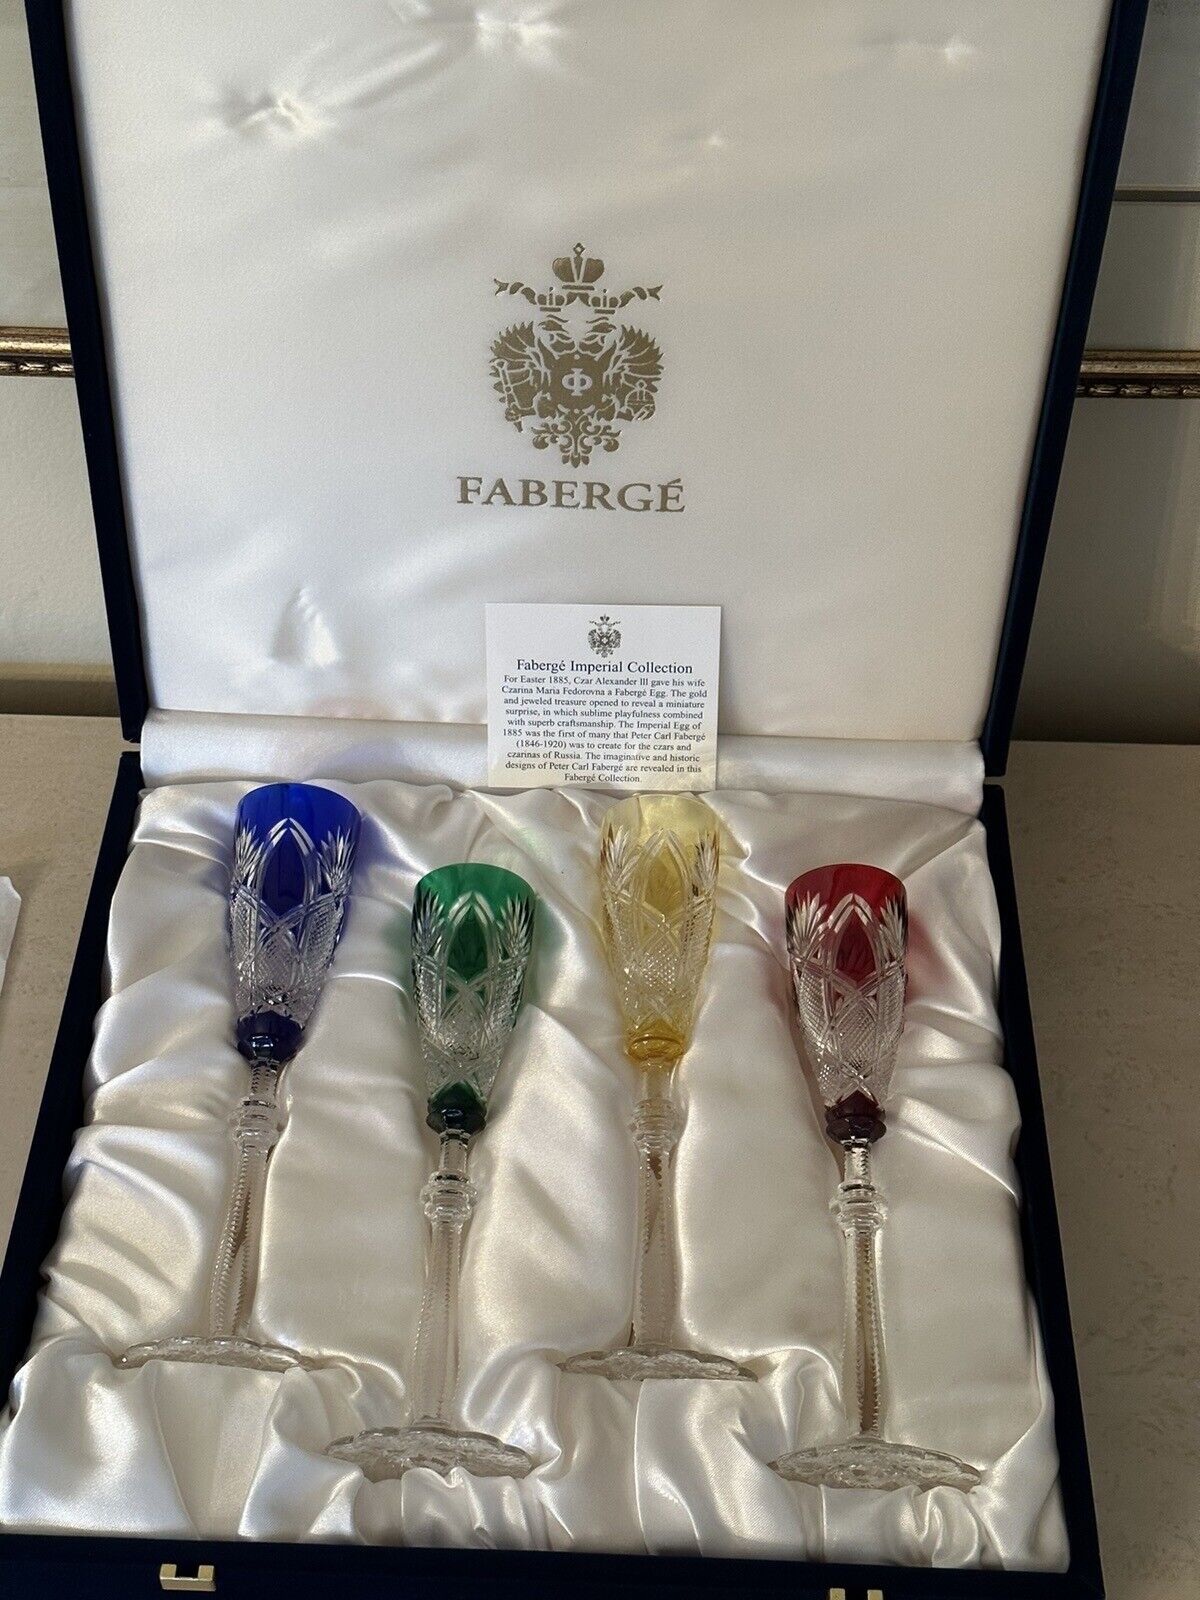 Signed Faberge Imperial Czar Crystal Liqueur Cordial Glass SET Of 4 In BOX